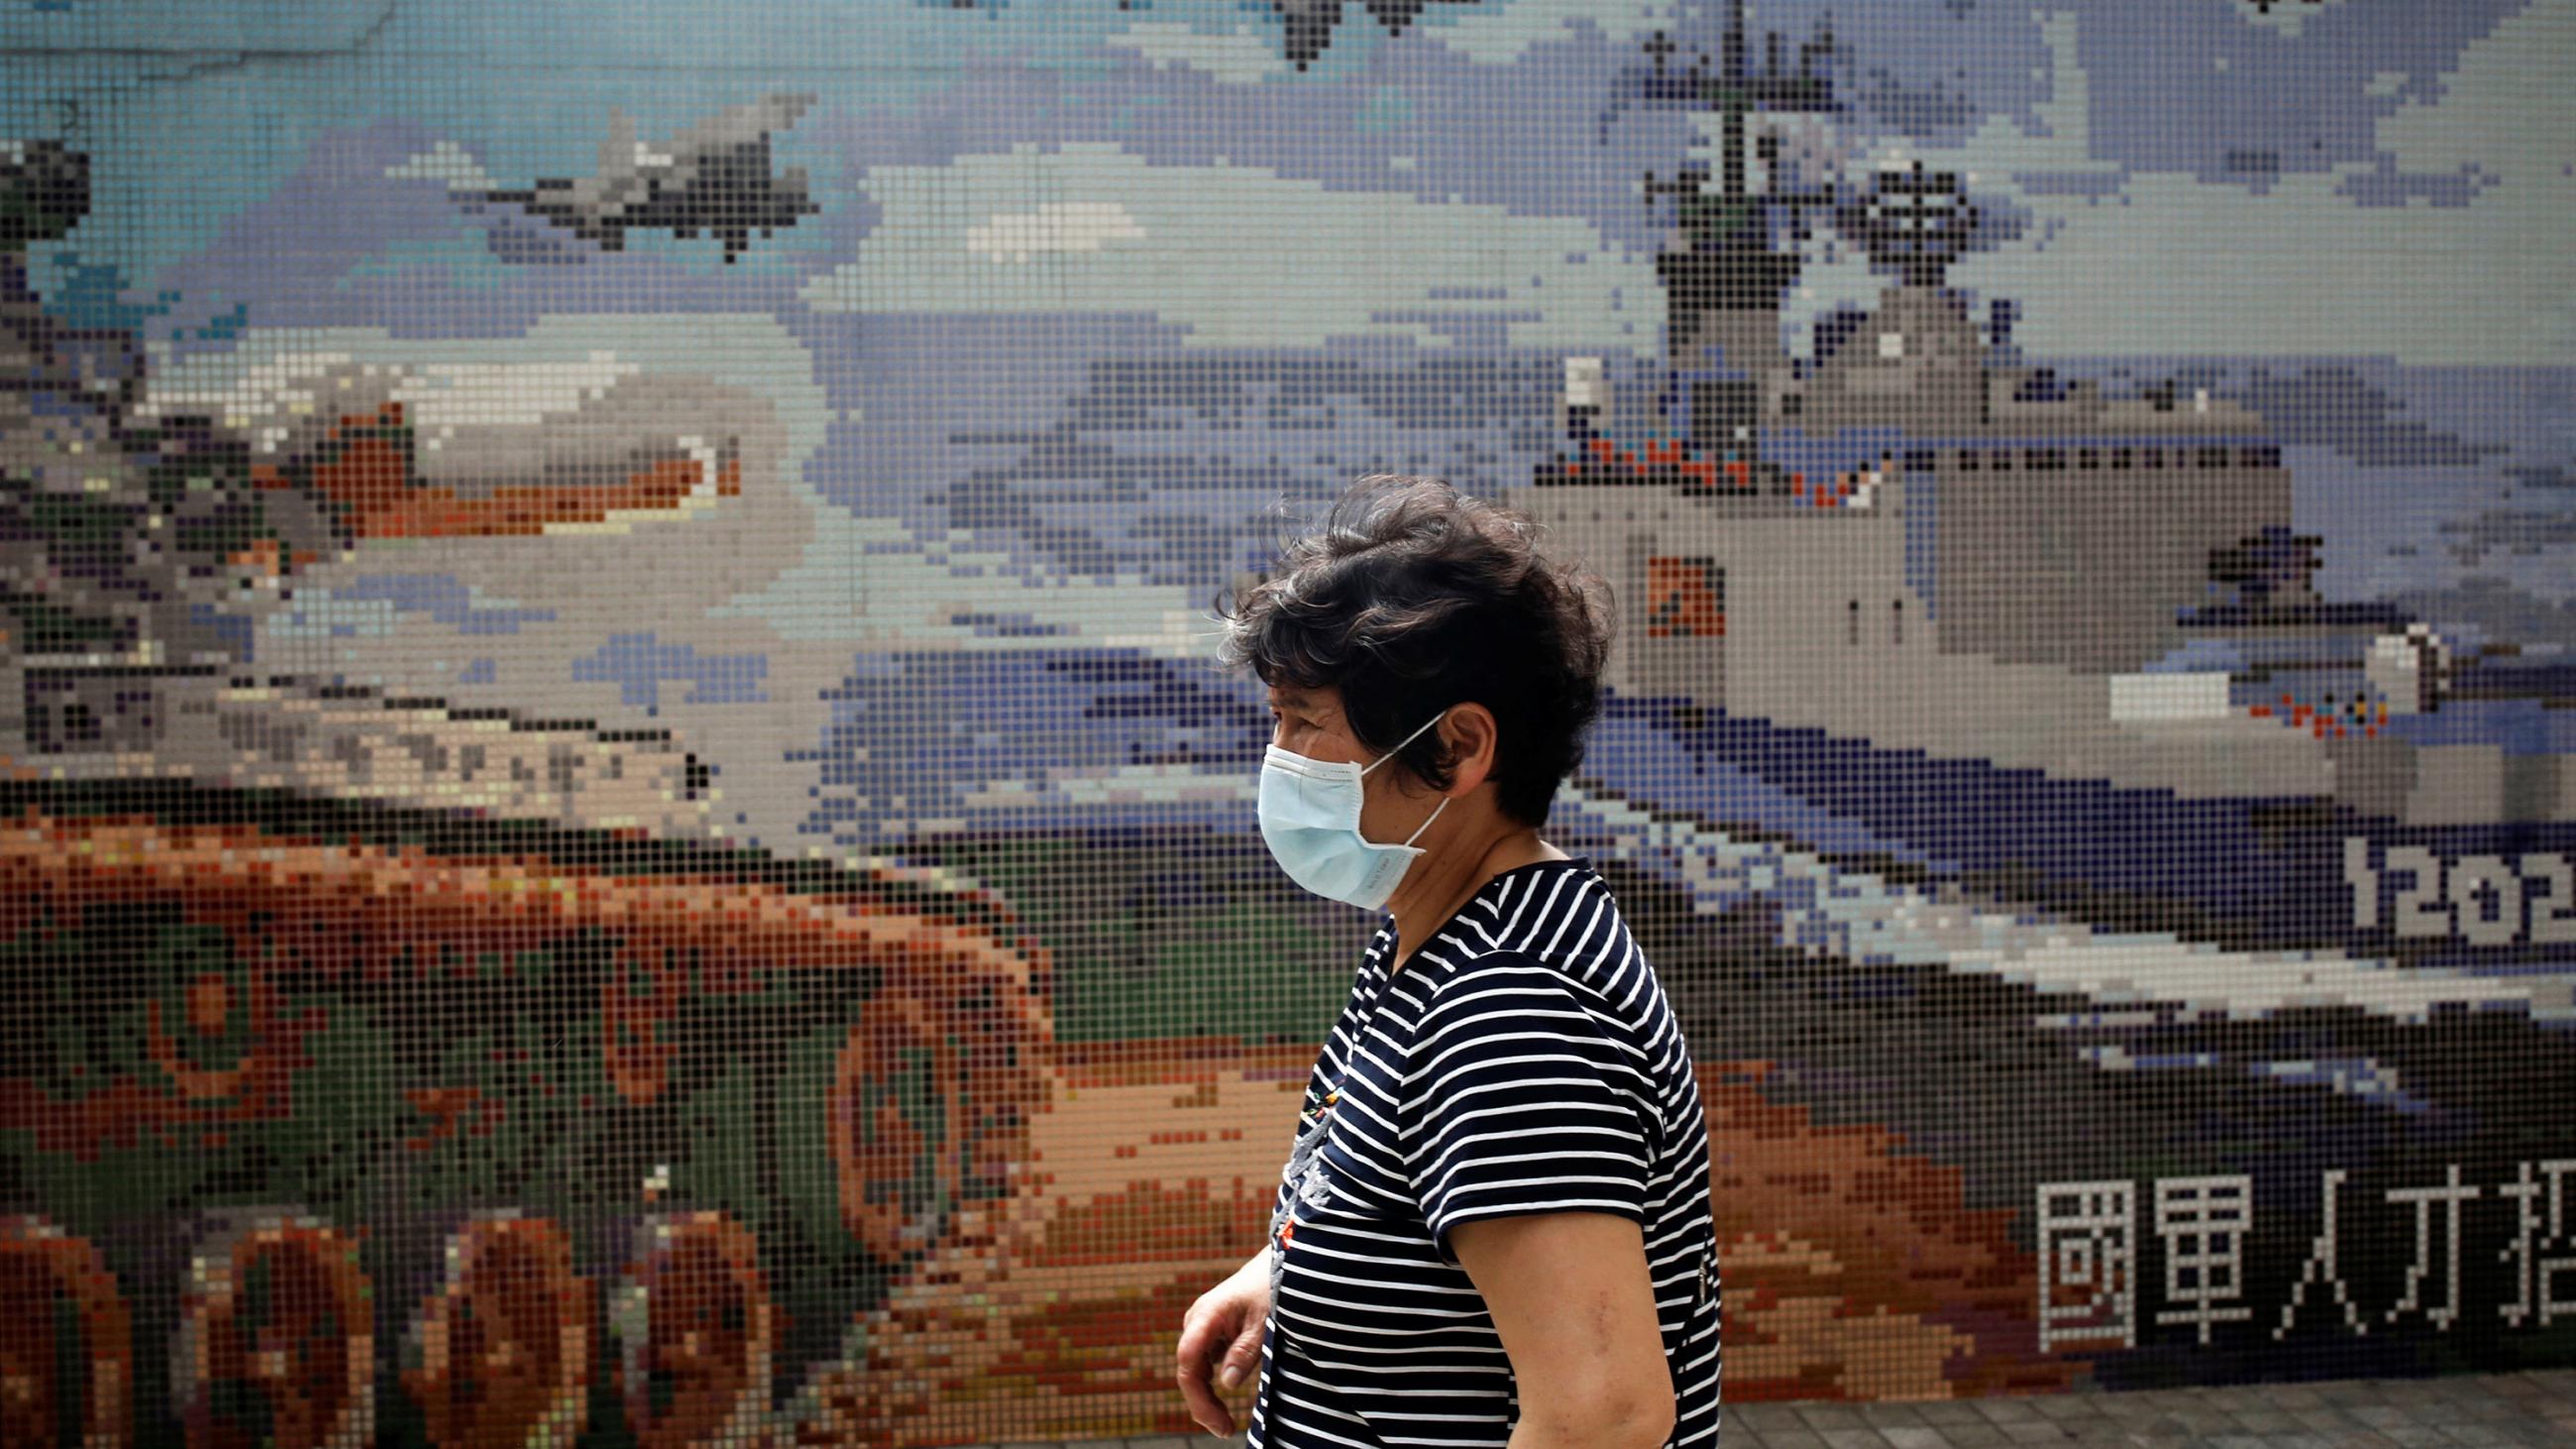 The photo shows a woman in a mask walking past a stylized poster showing war tanks, ships and planes. 